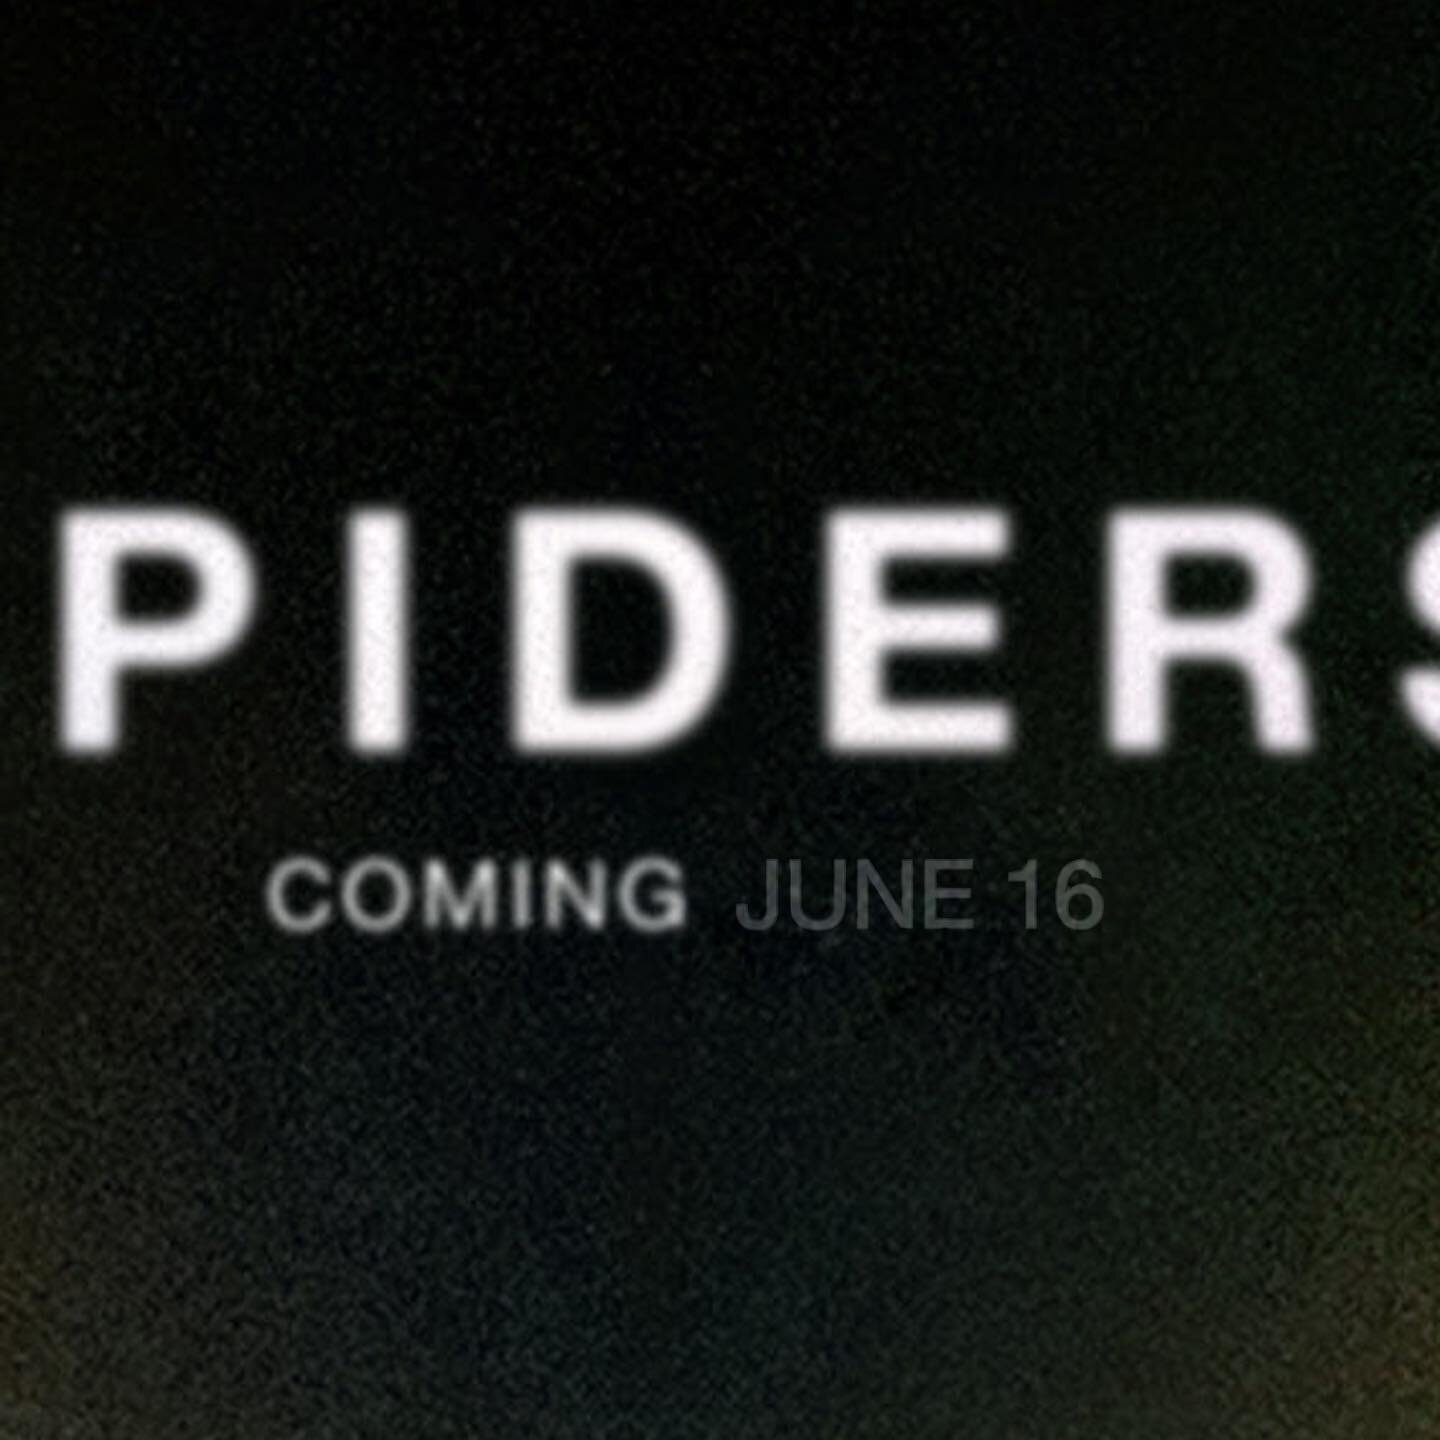 SPIDERS 
6.16.21
PRE-SAVE LINK IN BIO.